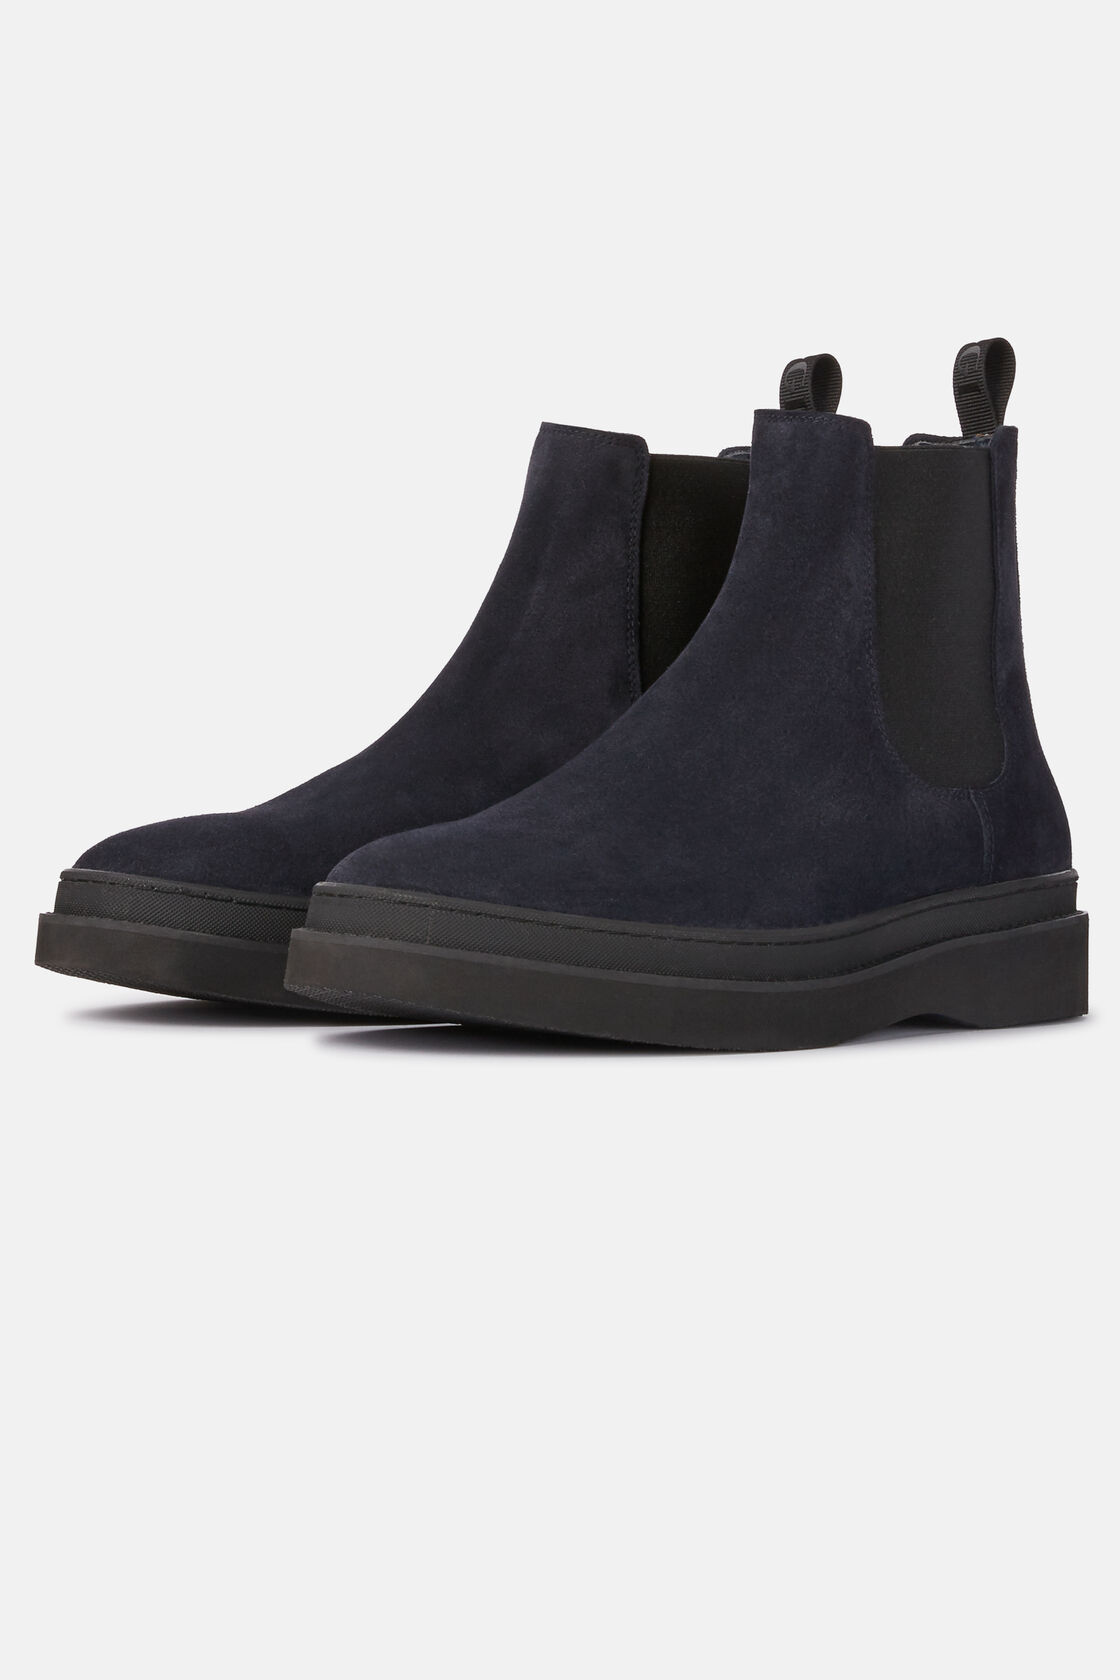 Suede Leather Ankle Boots, Navy blue, hi-res